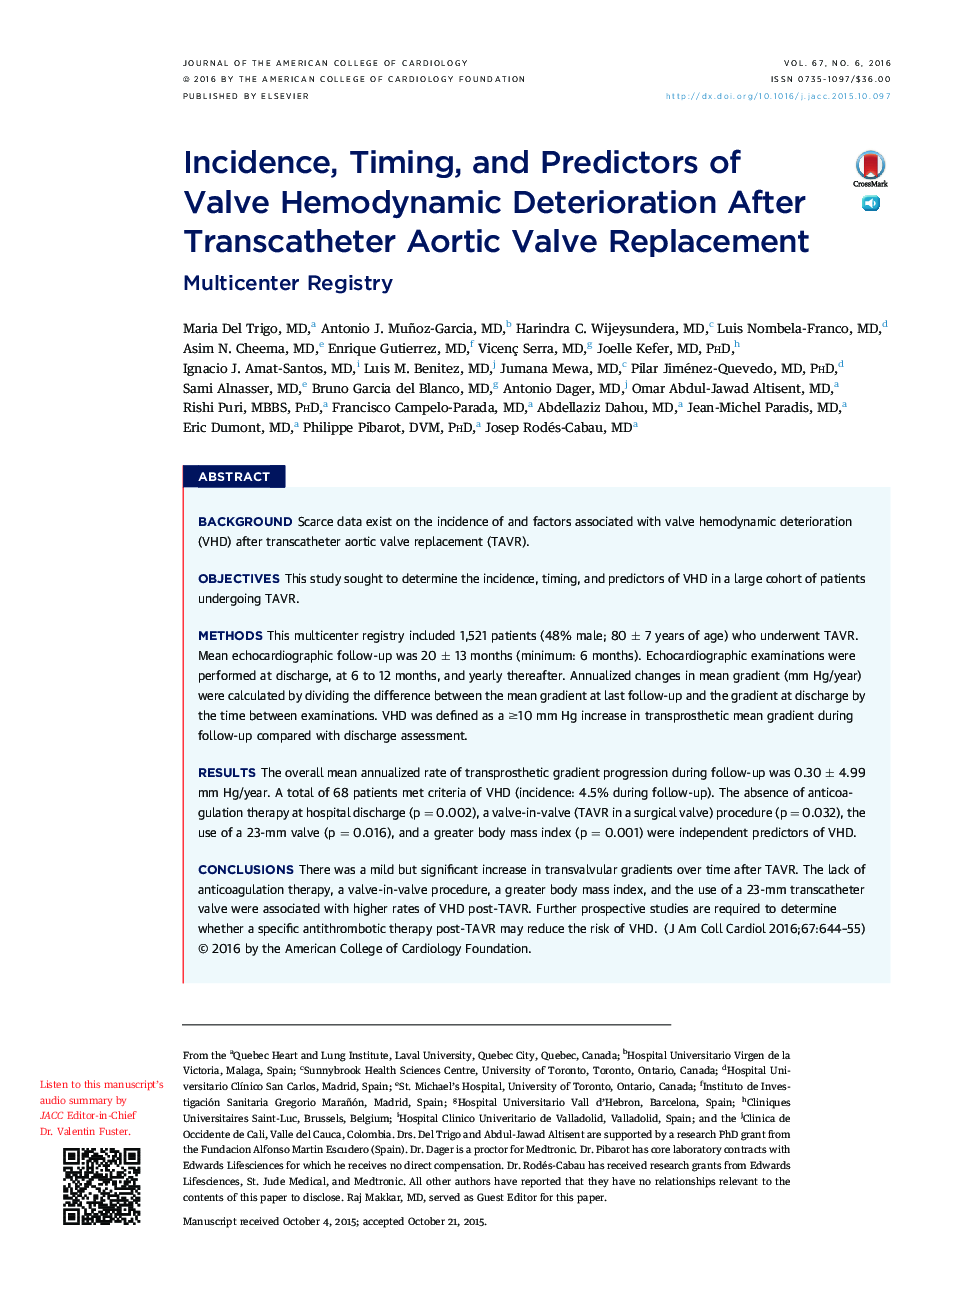 Incidence, Timing, and Predictors of ValveÂ Hemodynamic Deterioration After Transcatheter Aortic Valve Replacement: Multicenter Registry